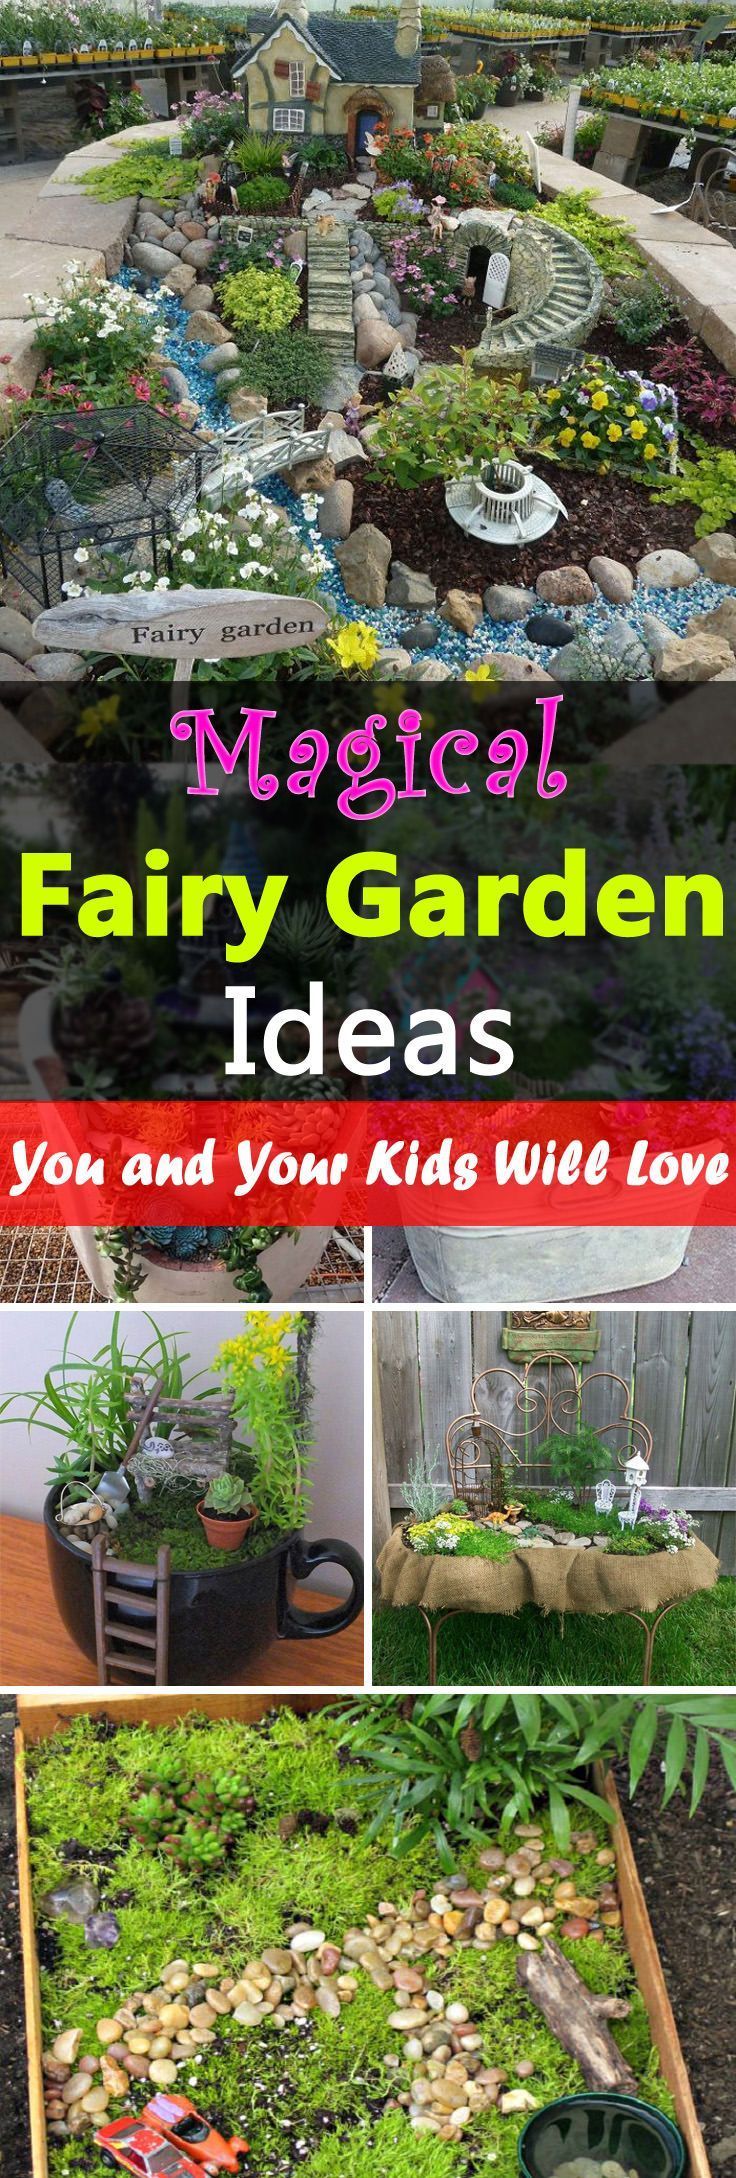 18 Magical Fairy Garden Ideas--The kids will love them, and you too. These cute ...